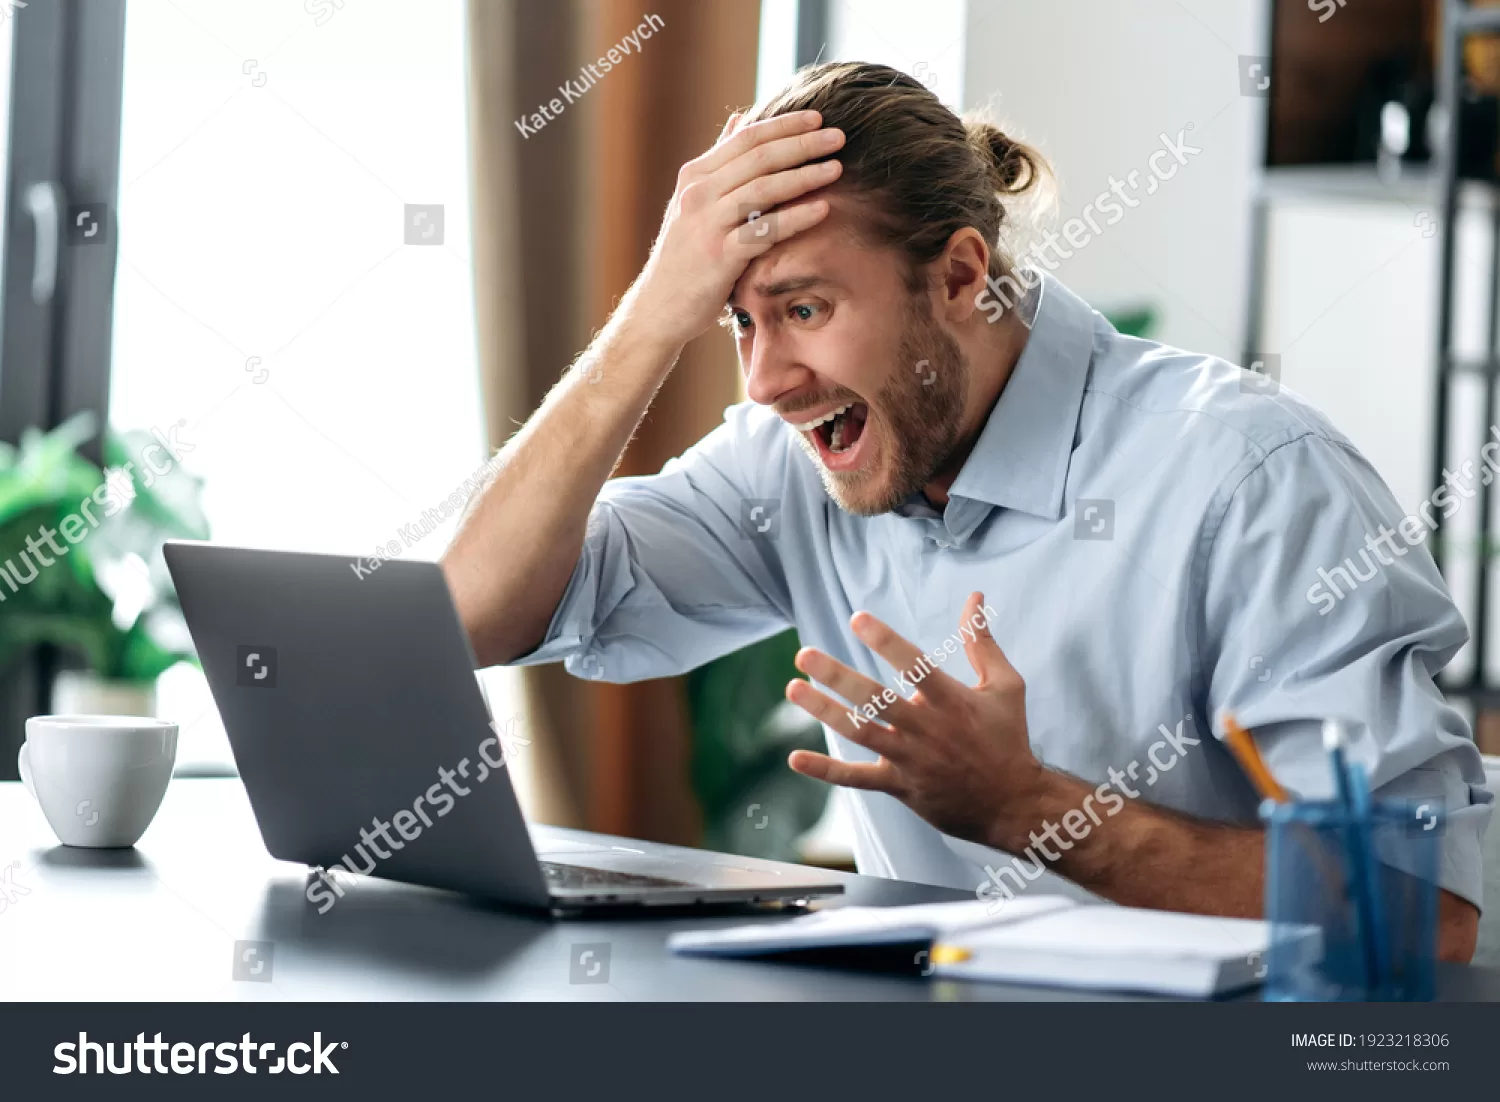 stock-photo-shocked-annoyed-caucasian-busy-guy-looking-at-a-laptop-in-confusion-received-unexpected-news-1923218306